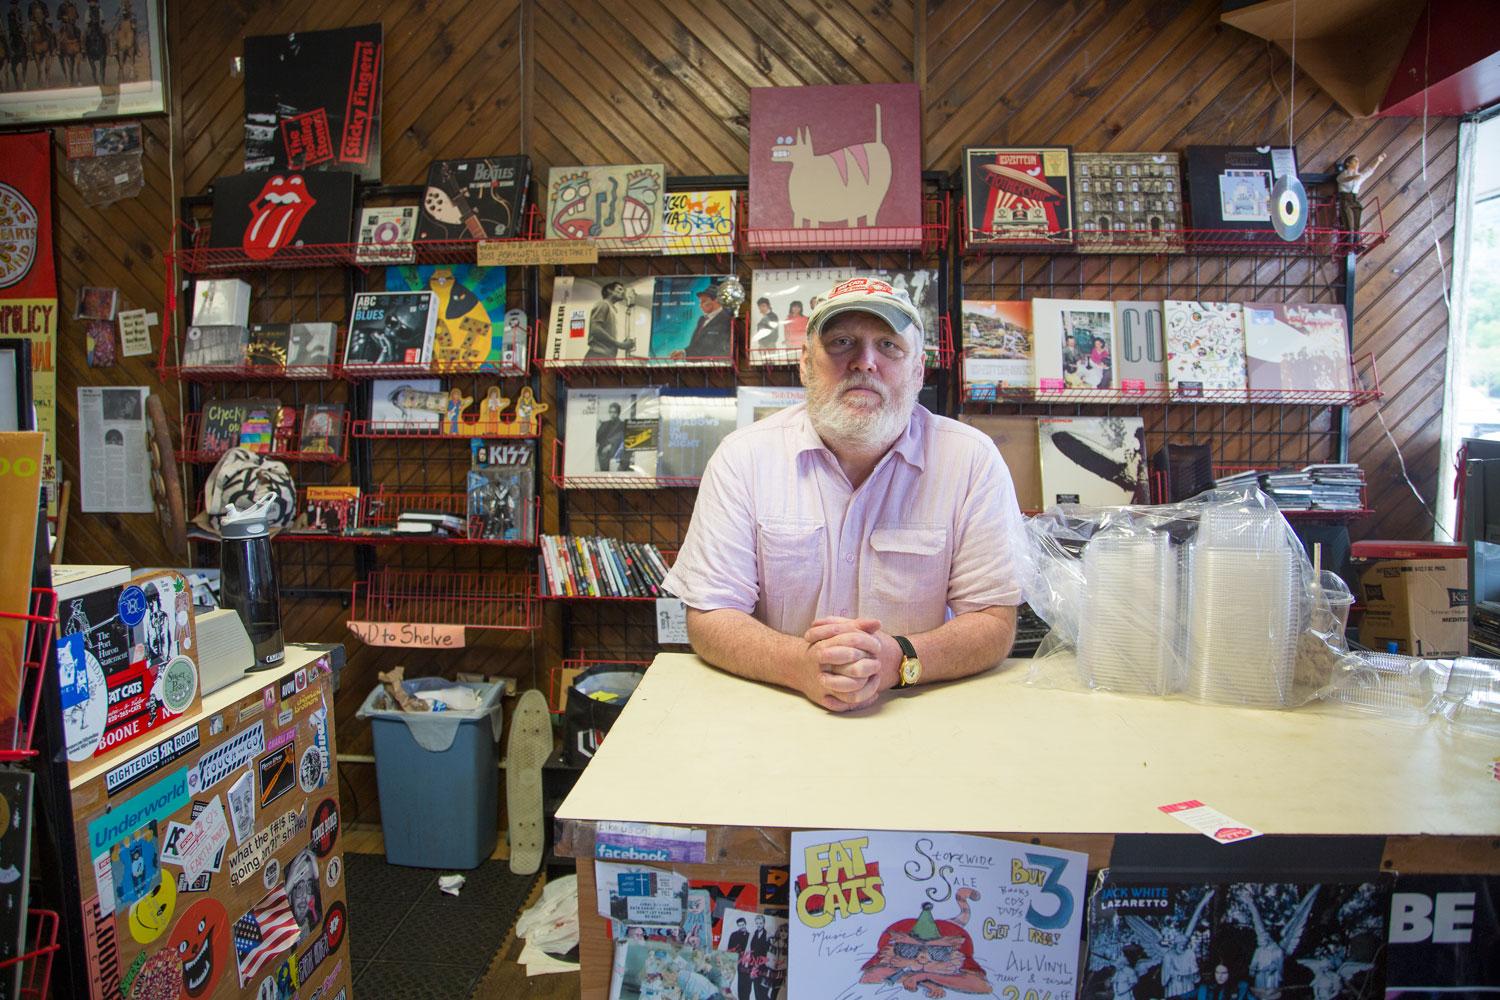  Store owner Kevin Fritch poses for a photo inside of Fat Cats record store on King Street. 